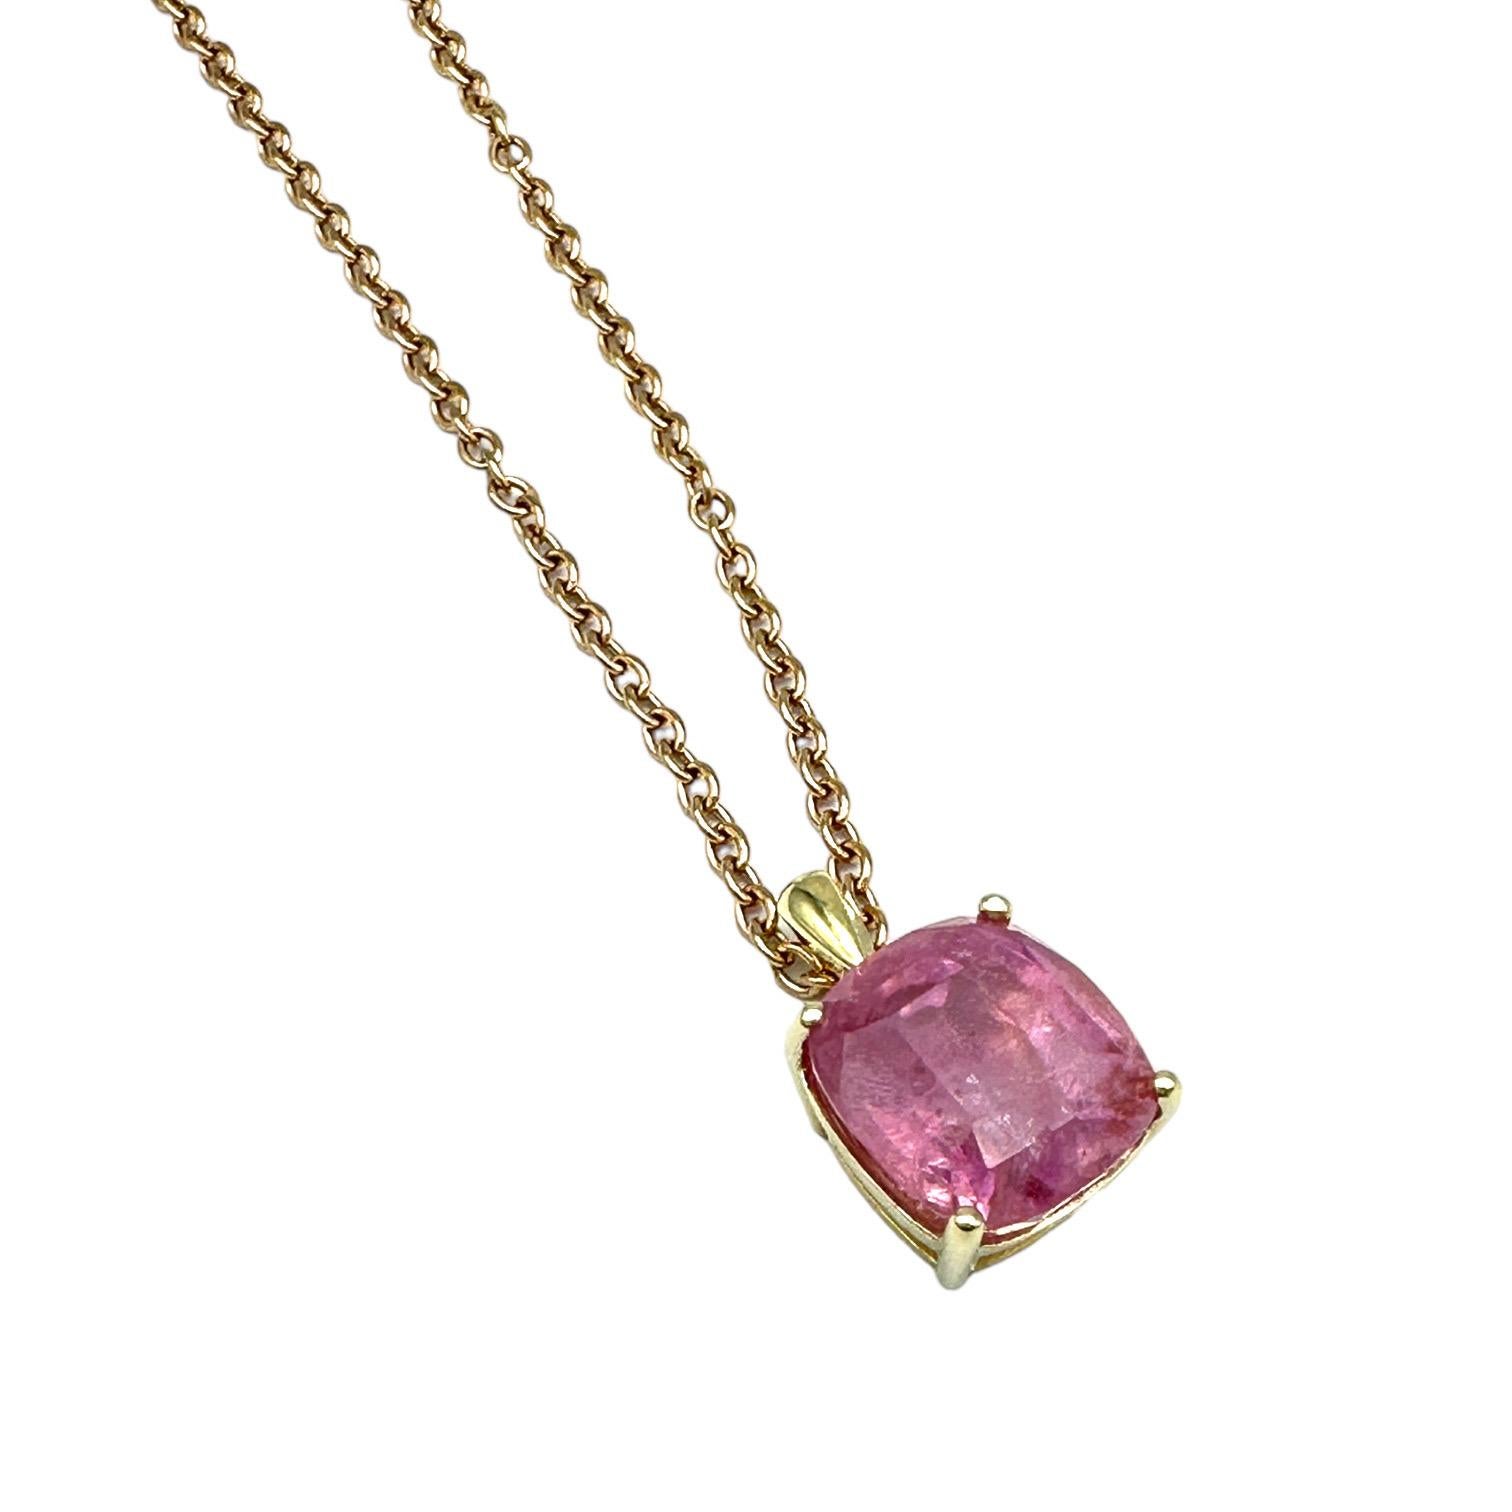 Stunning and Natural sapphire is set in a four-prong setting, captivating its pink color. The chain is a 26'